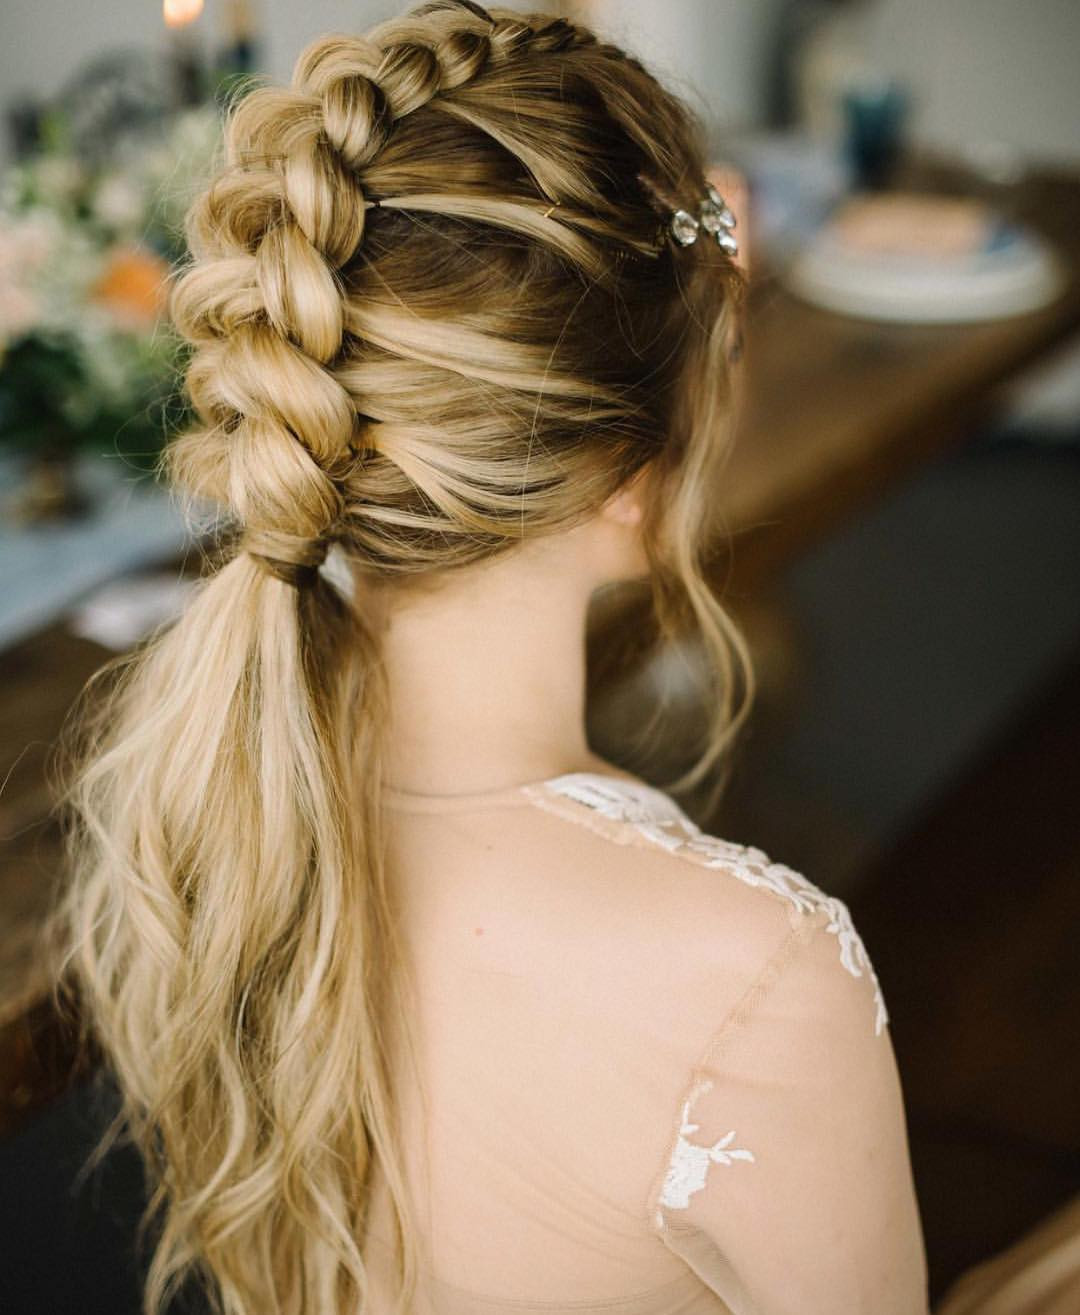 Wedding Hairstyles With Braids For Long Hair
 10 Braided Hairstyles for Long Hair Weddings Festivals